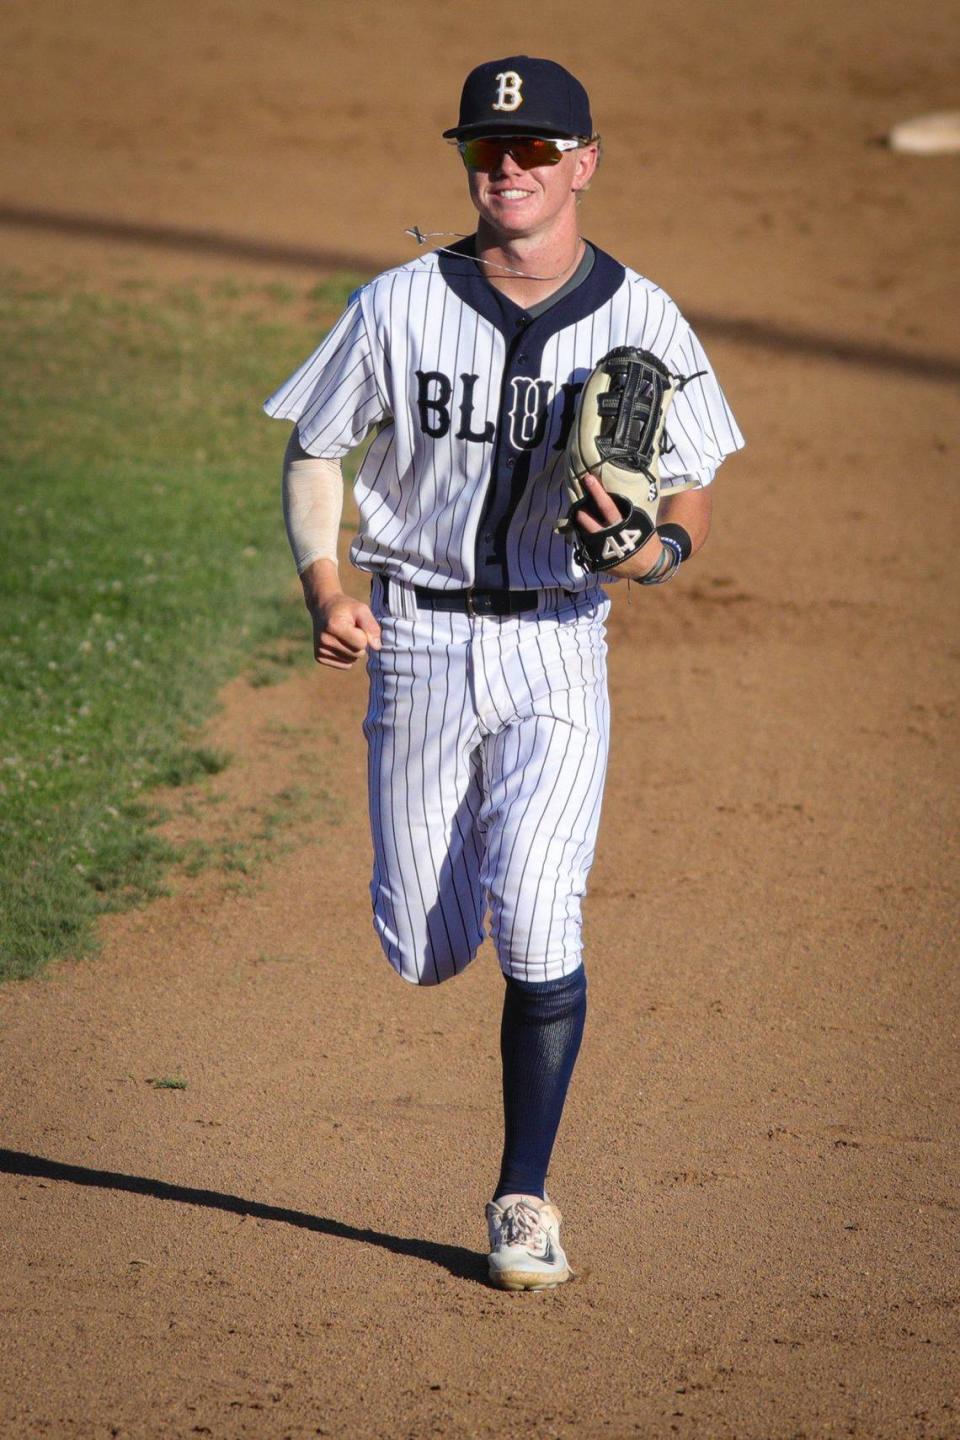 Jake Hixenbaugh runs in from left field during the San Luis Obispo Blues’ game against the Santa Barbara Foresters on July 3, 2023.